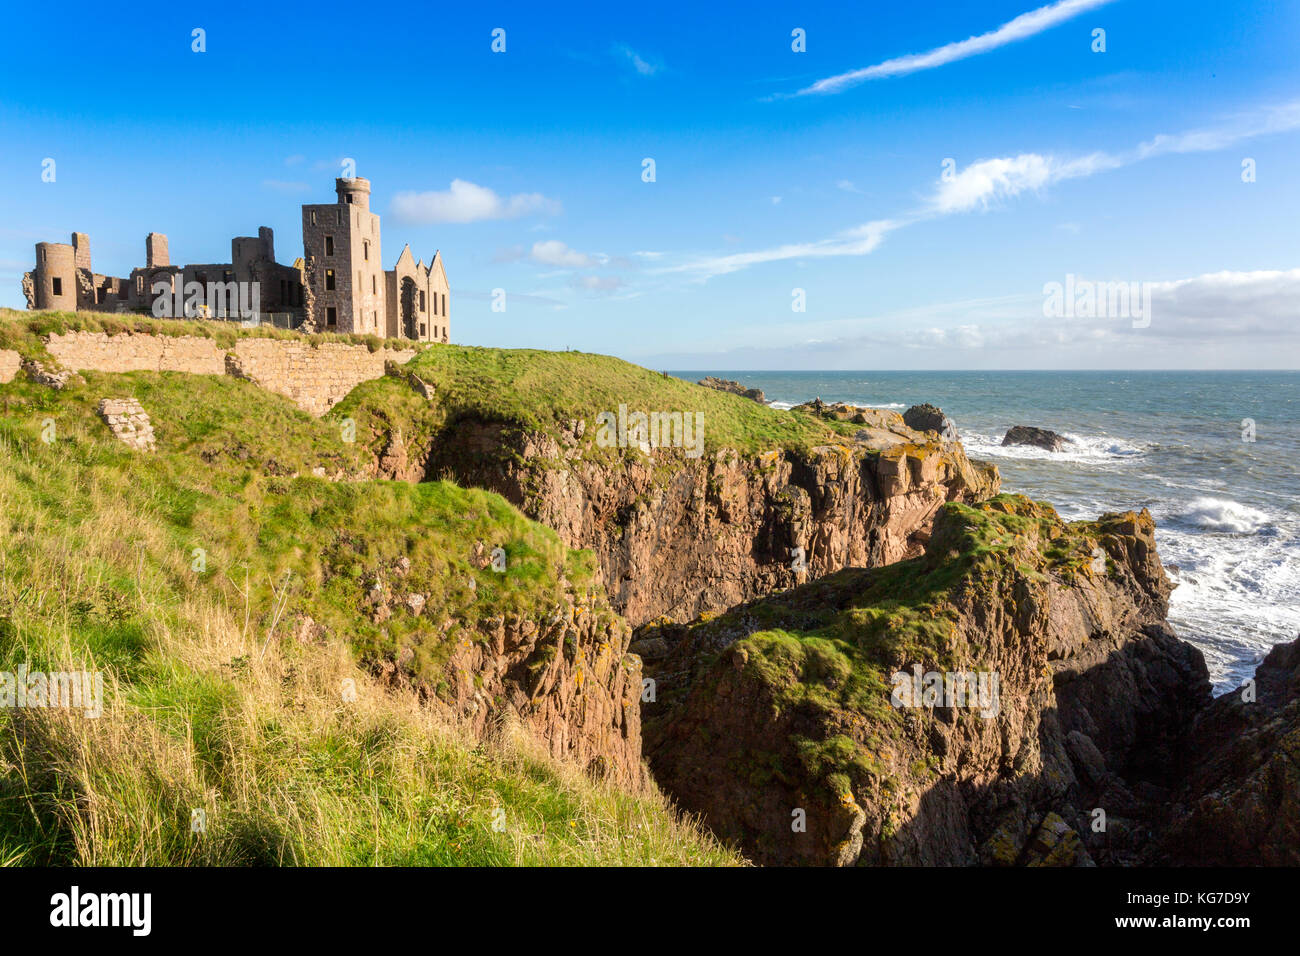 The cliff top ruins of Slains Castle on the North Sea coast in Aberdeenshire, Scotland - allegedly the inspiration for Bram Stoker's novel 'Dracula'. Stock Photo